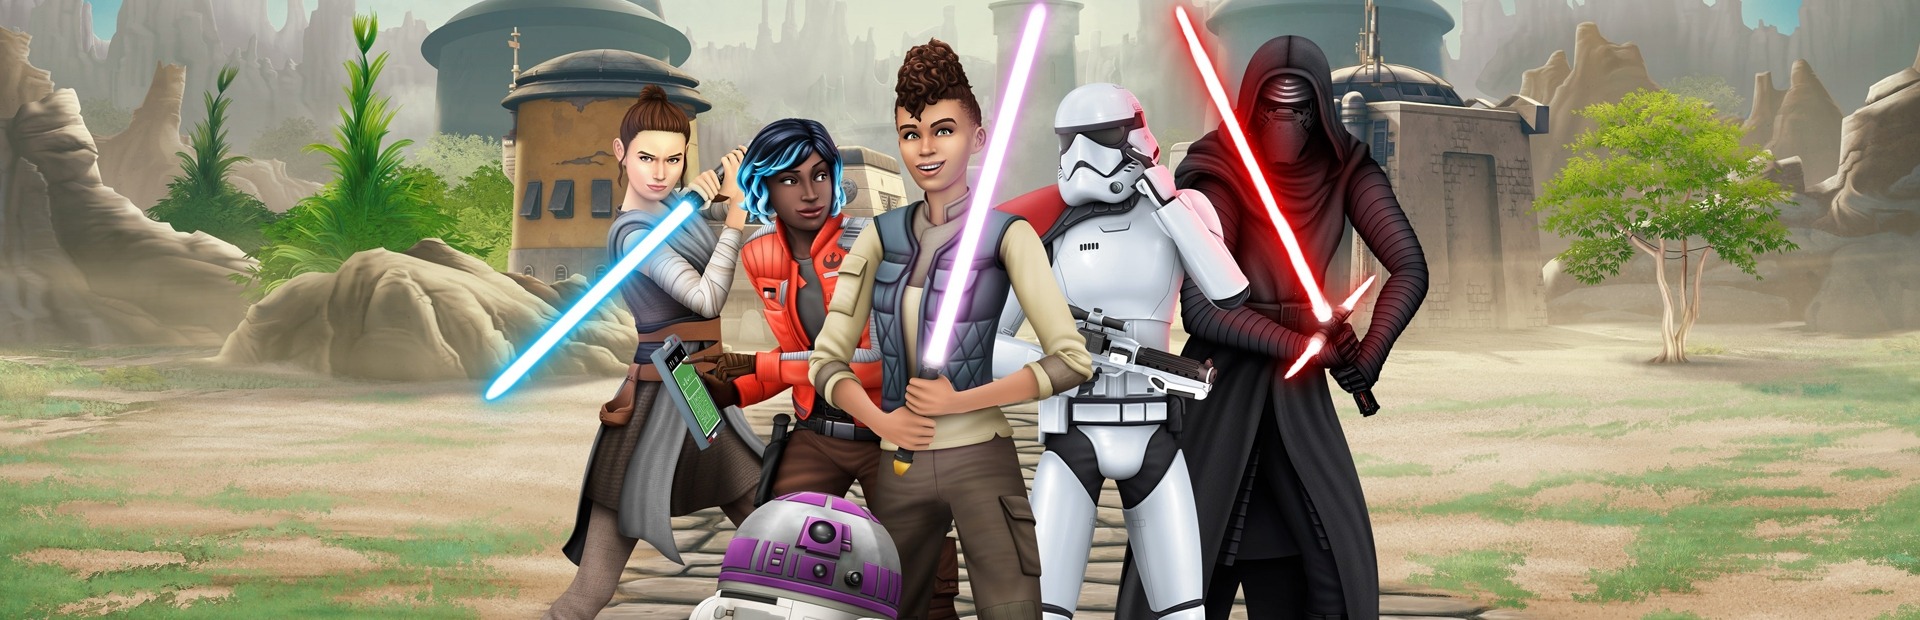 Banner The Sims 4 Star Wars: Journey to Batuu PS4